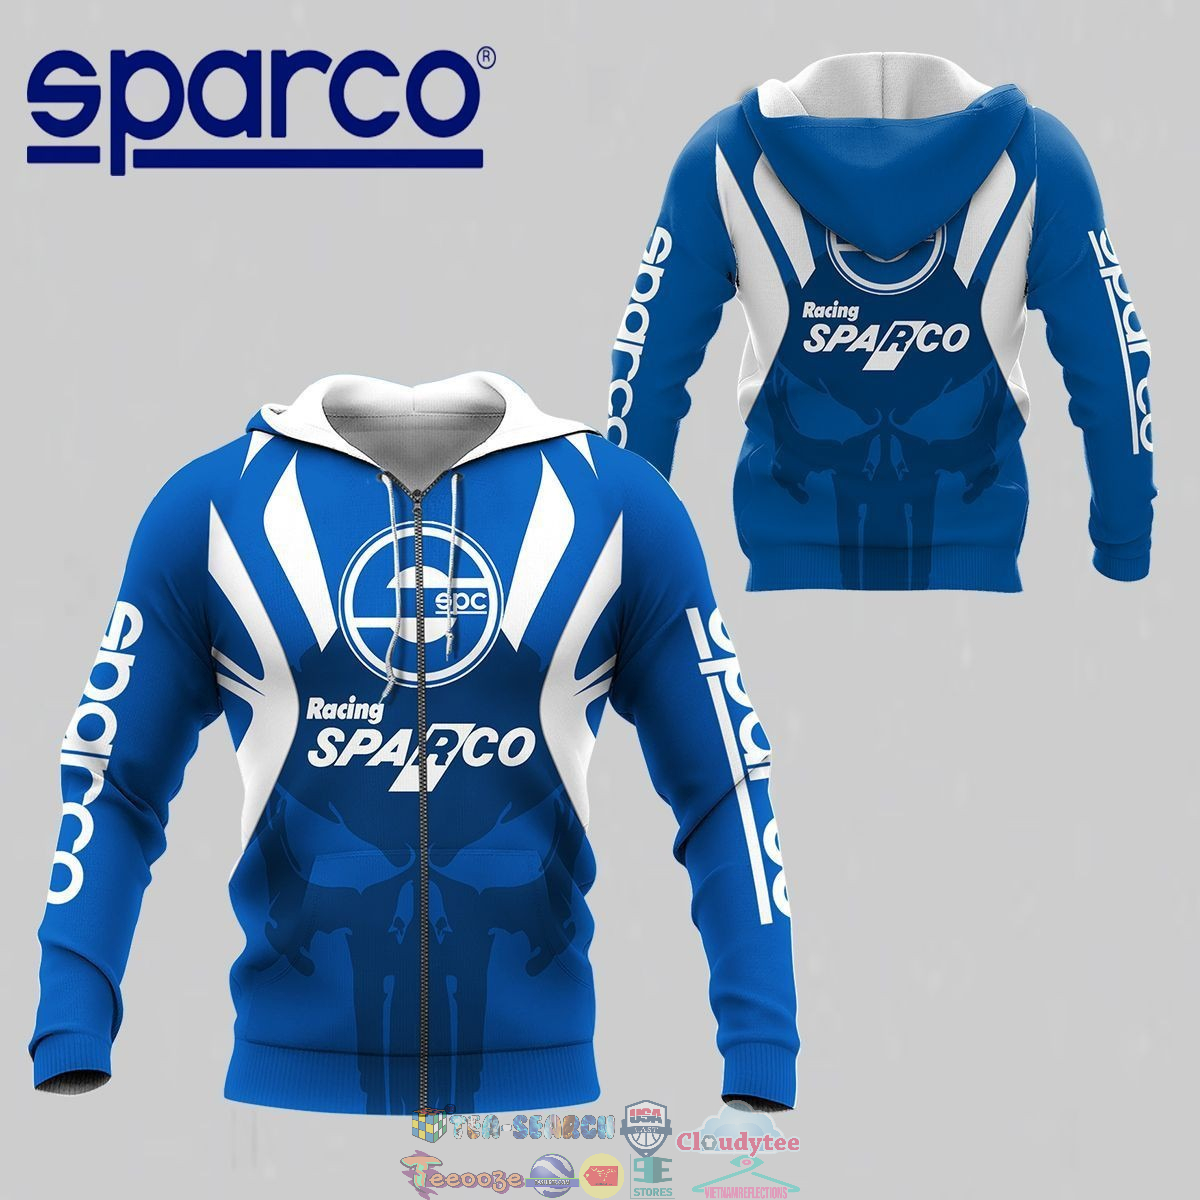 Sparco ver 35 3D hoodie and t-shirt